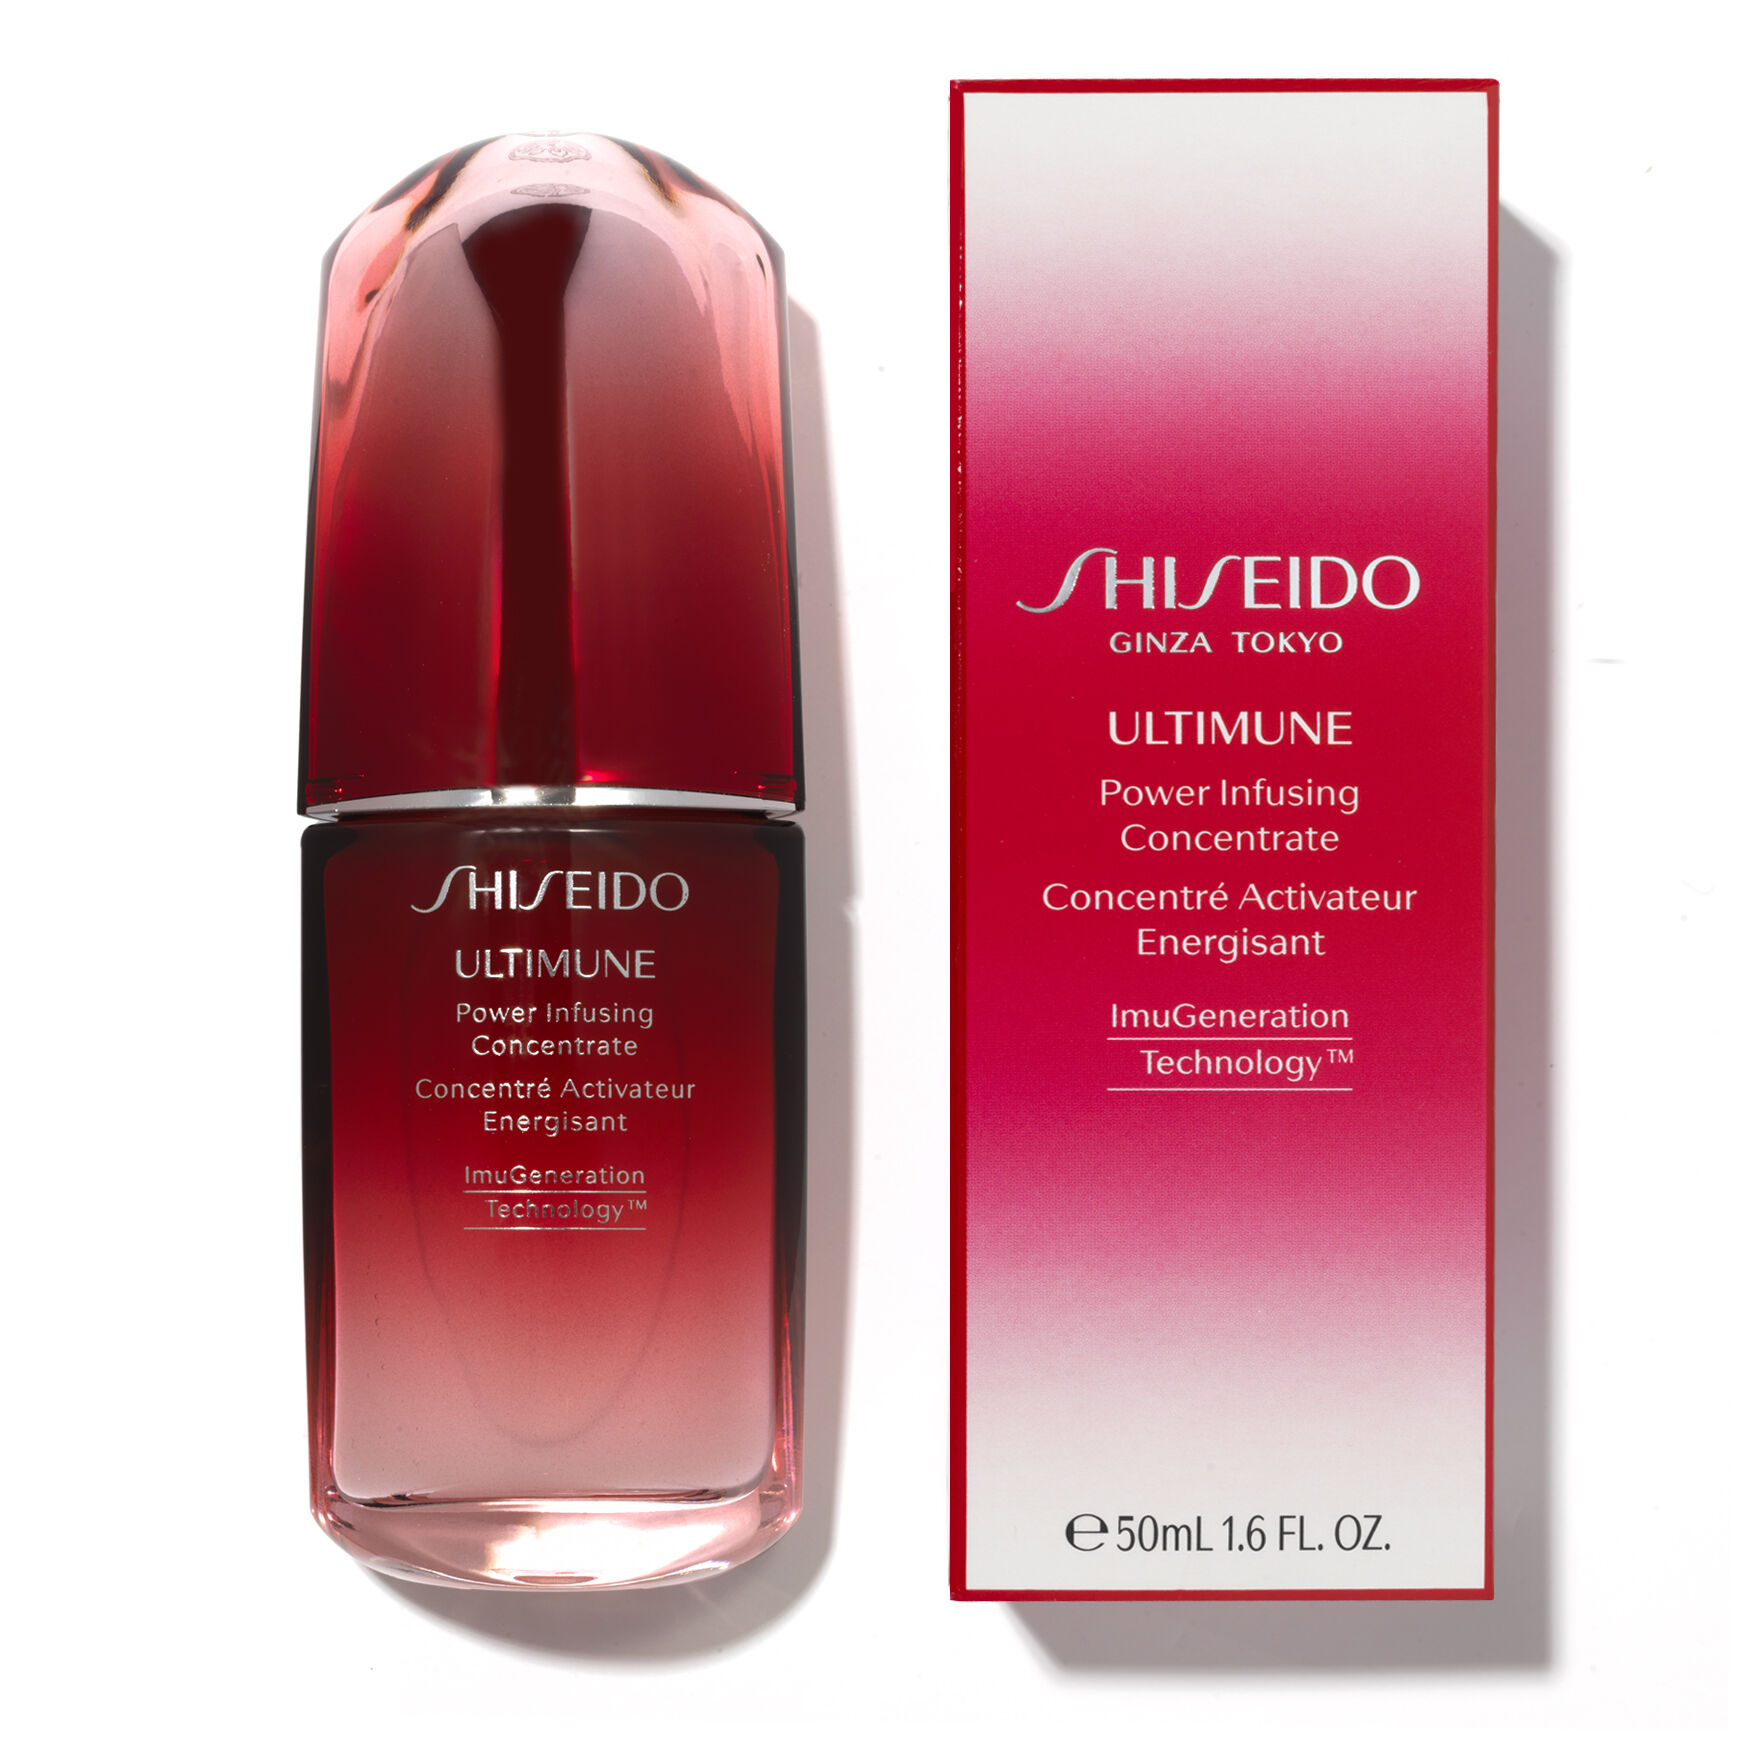 Shiseido power infusing concentrate. Ultimune концентрат шисейдо Power infusing. Концентрат Shiseido Ultimune Power infusing Concentrate. Shiseido Ultimate Power infusing. Крем Shiseido Ultimune.